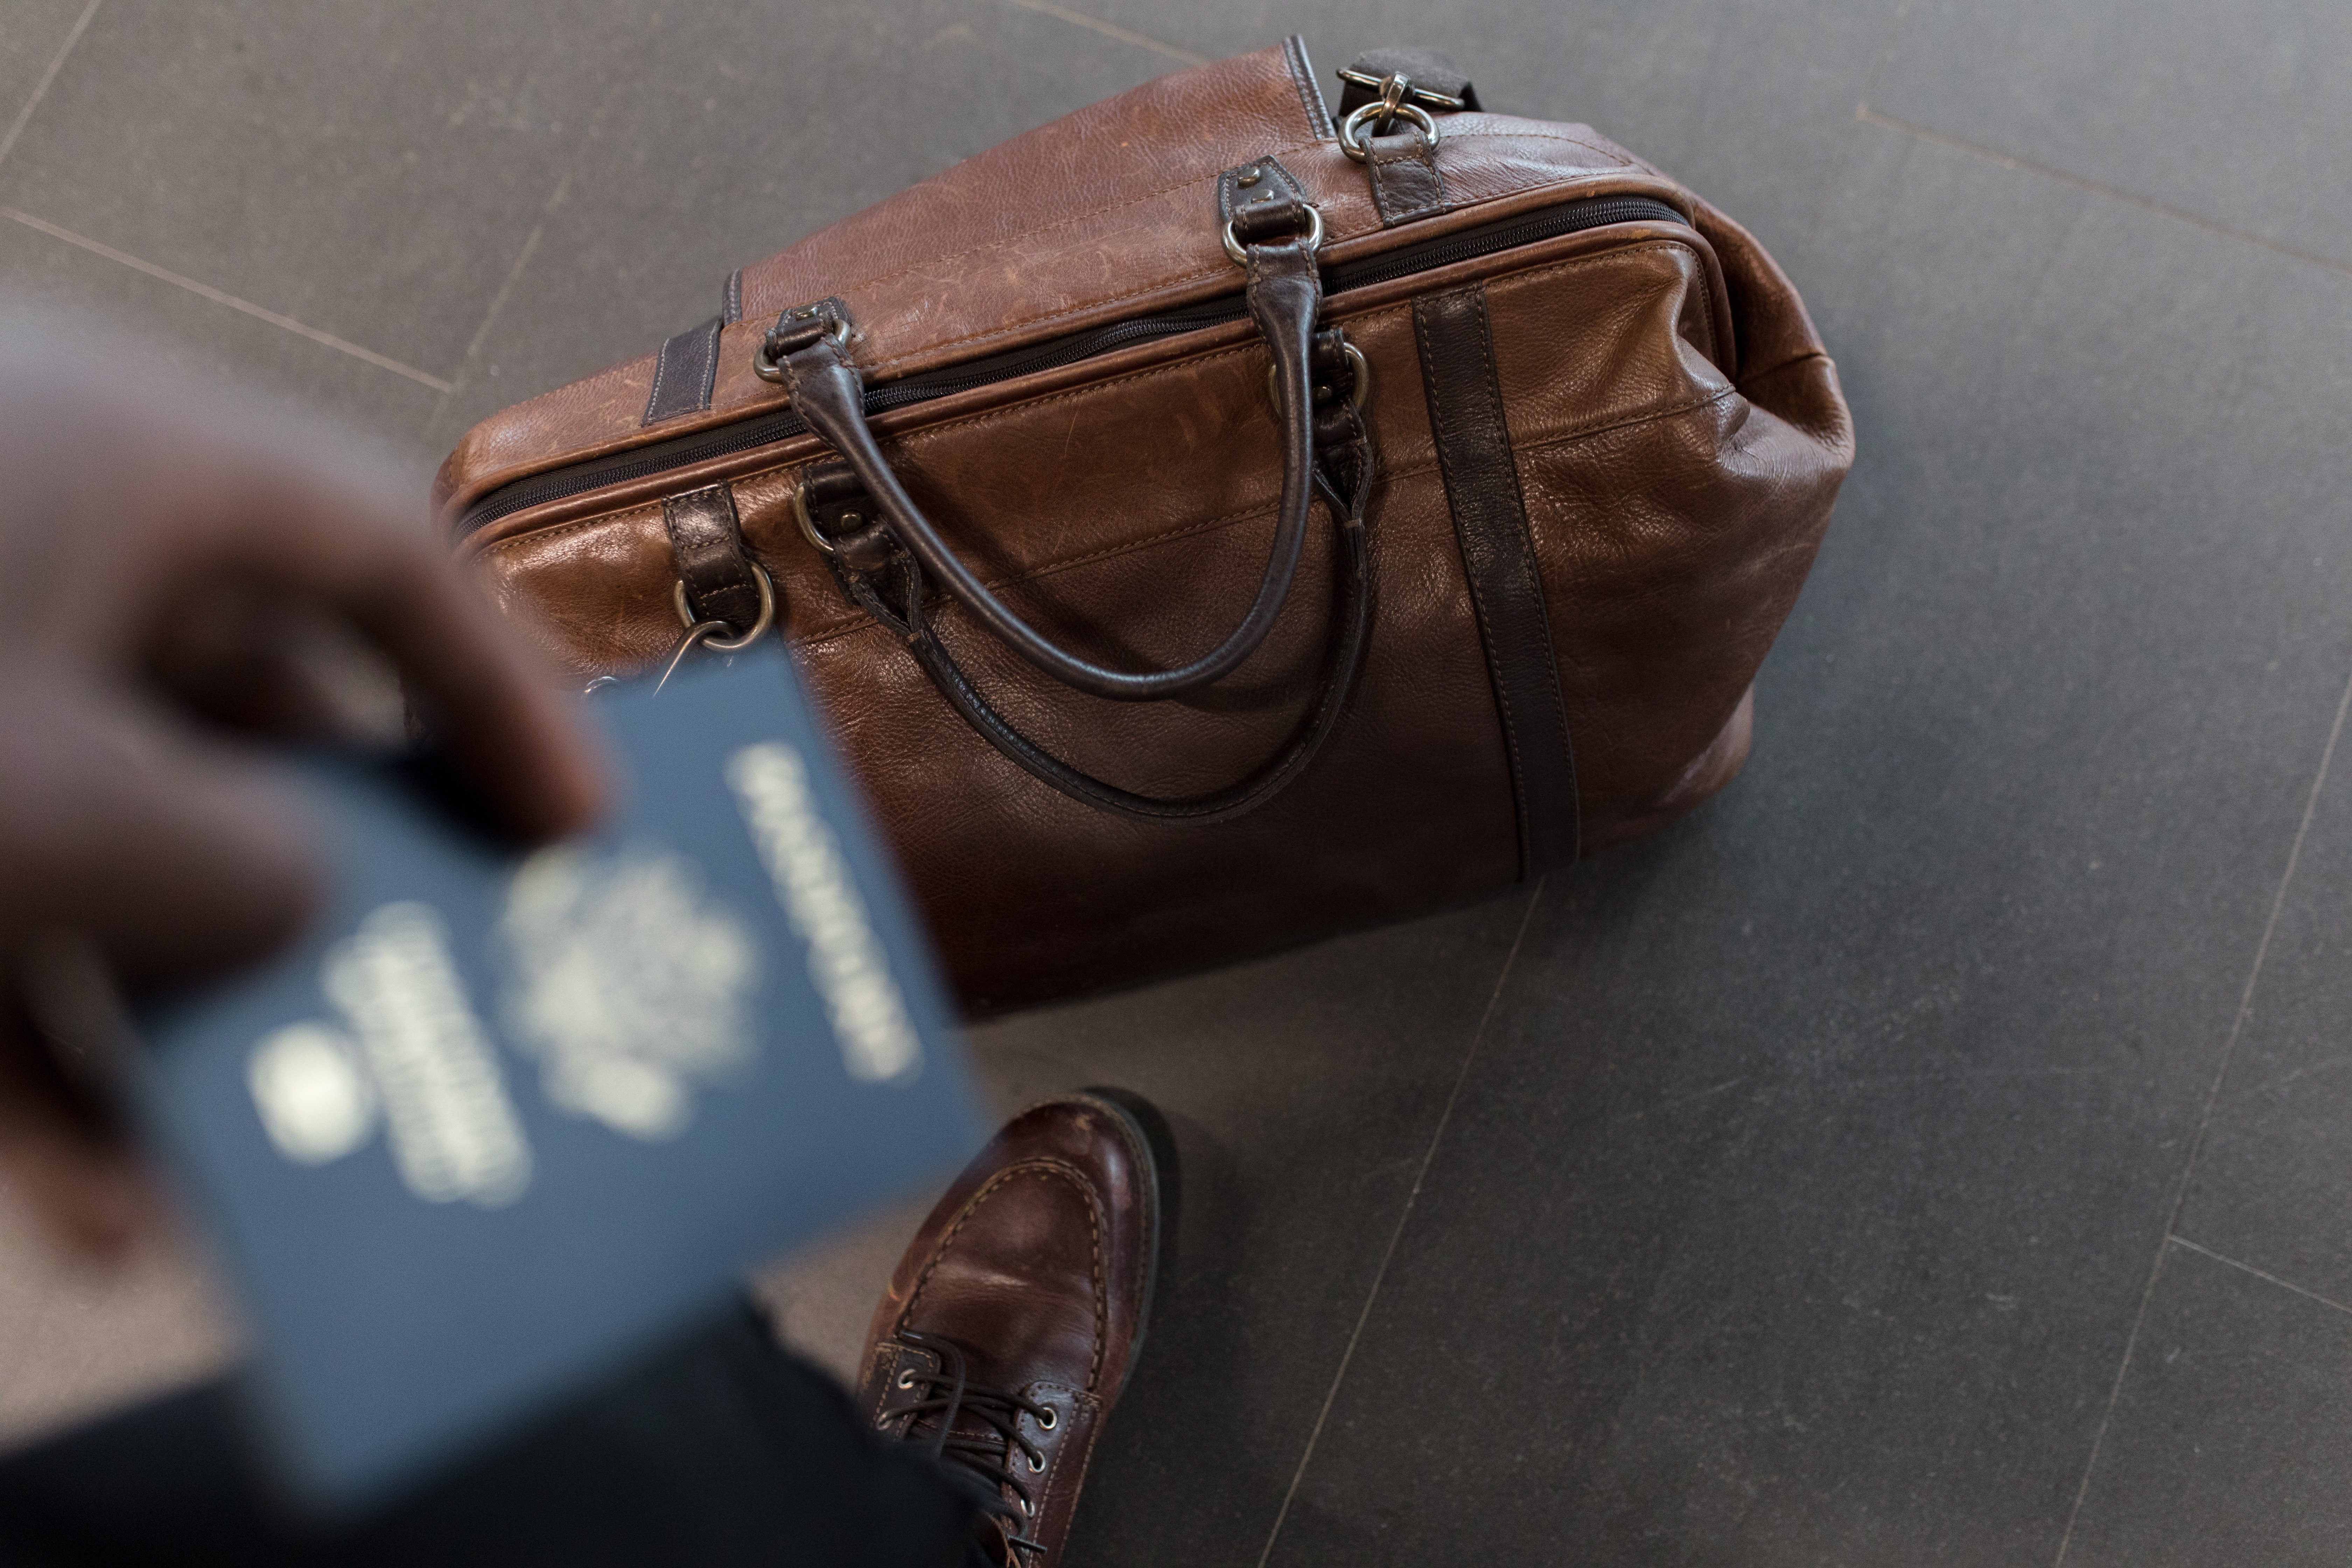 Travel Insurance 101: What You Need to Know Before Your Trip